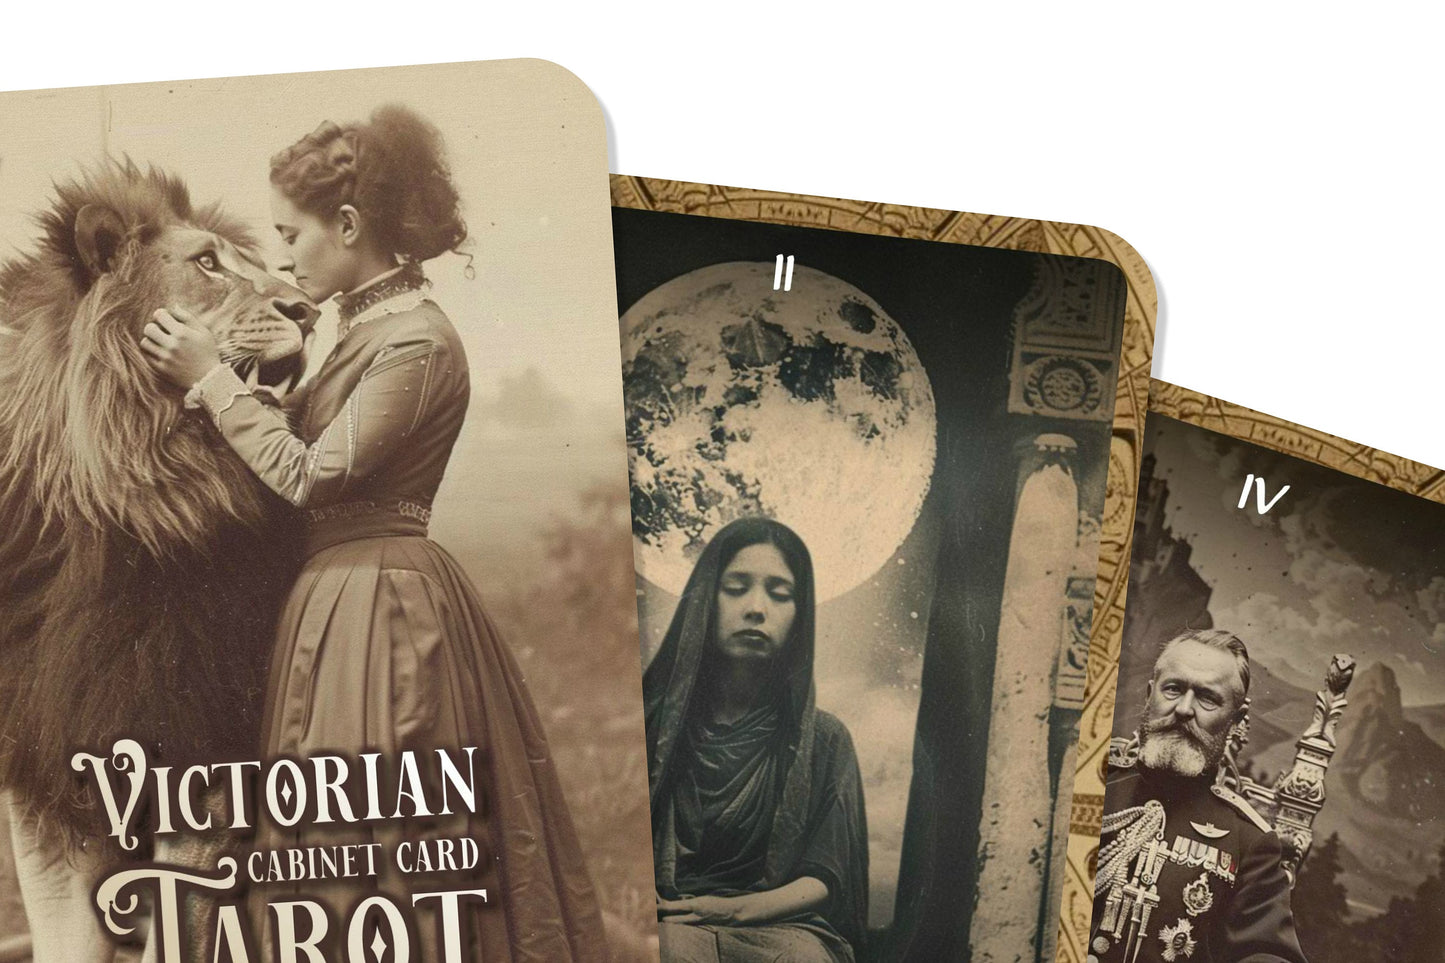 Victorian Cabinet Card Tarot - Major Arcana - insights that are as relevant today as they would have been in the Victorian era